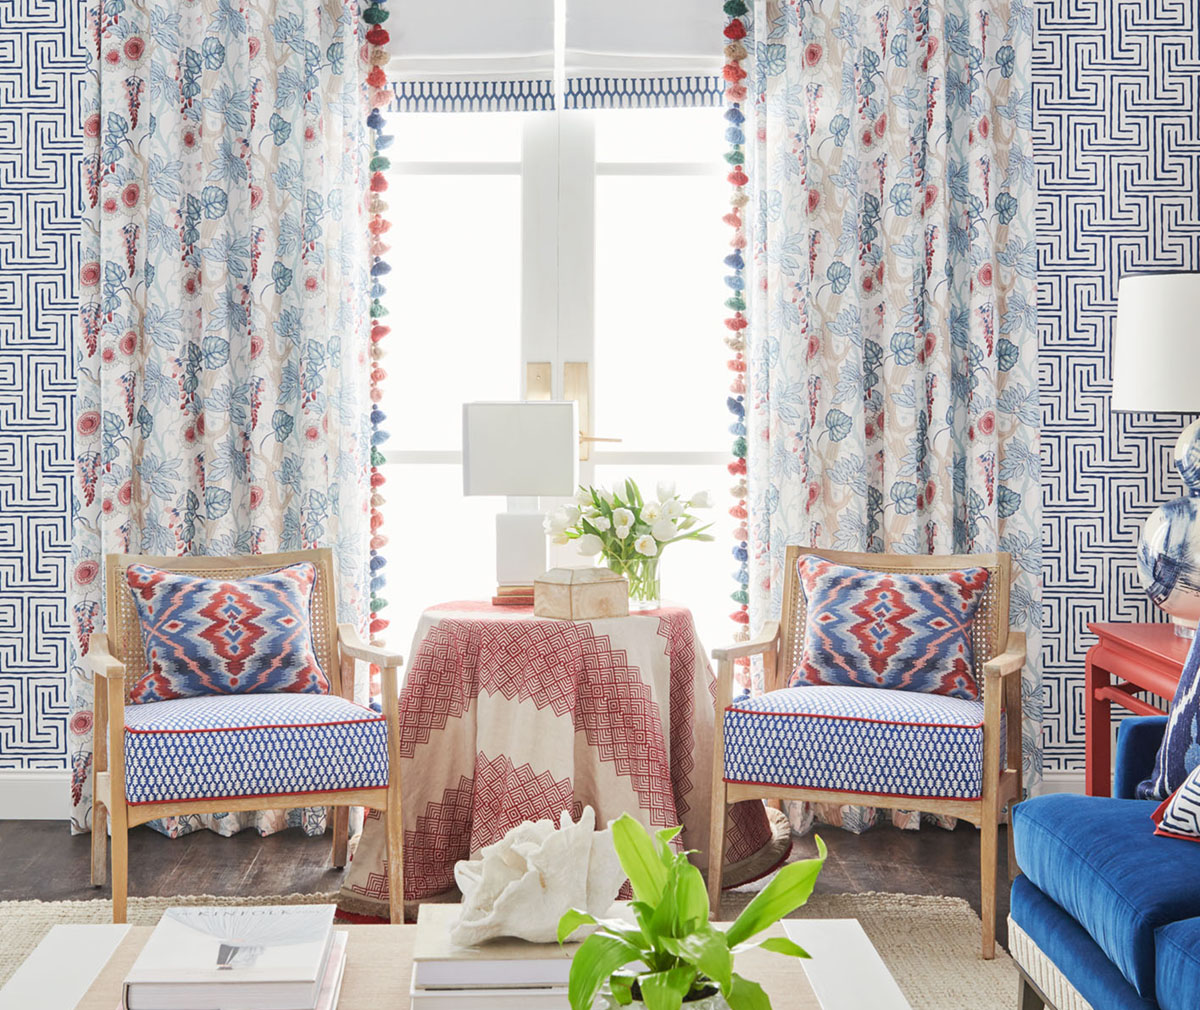 Room decorated in blue and white with pops of red using Stroheim Color Collection.